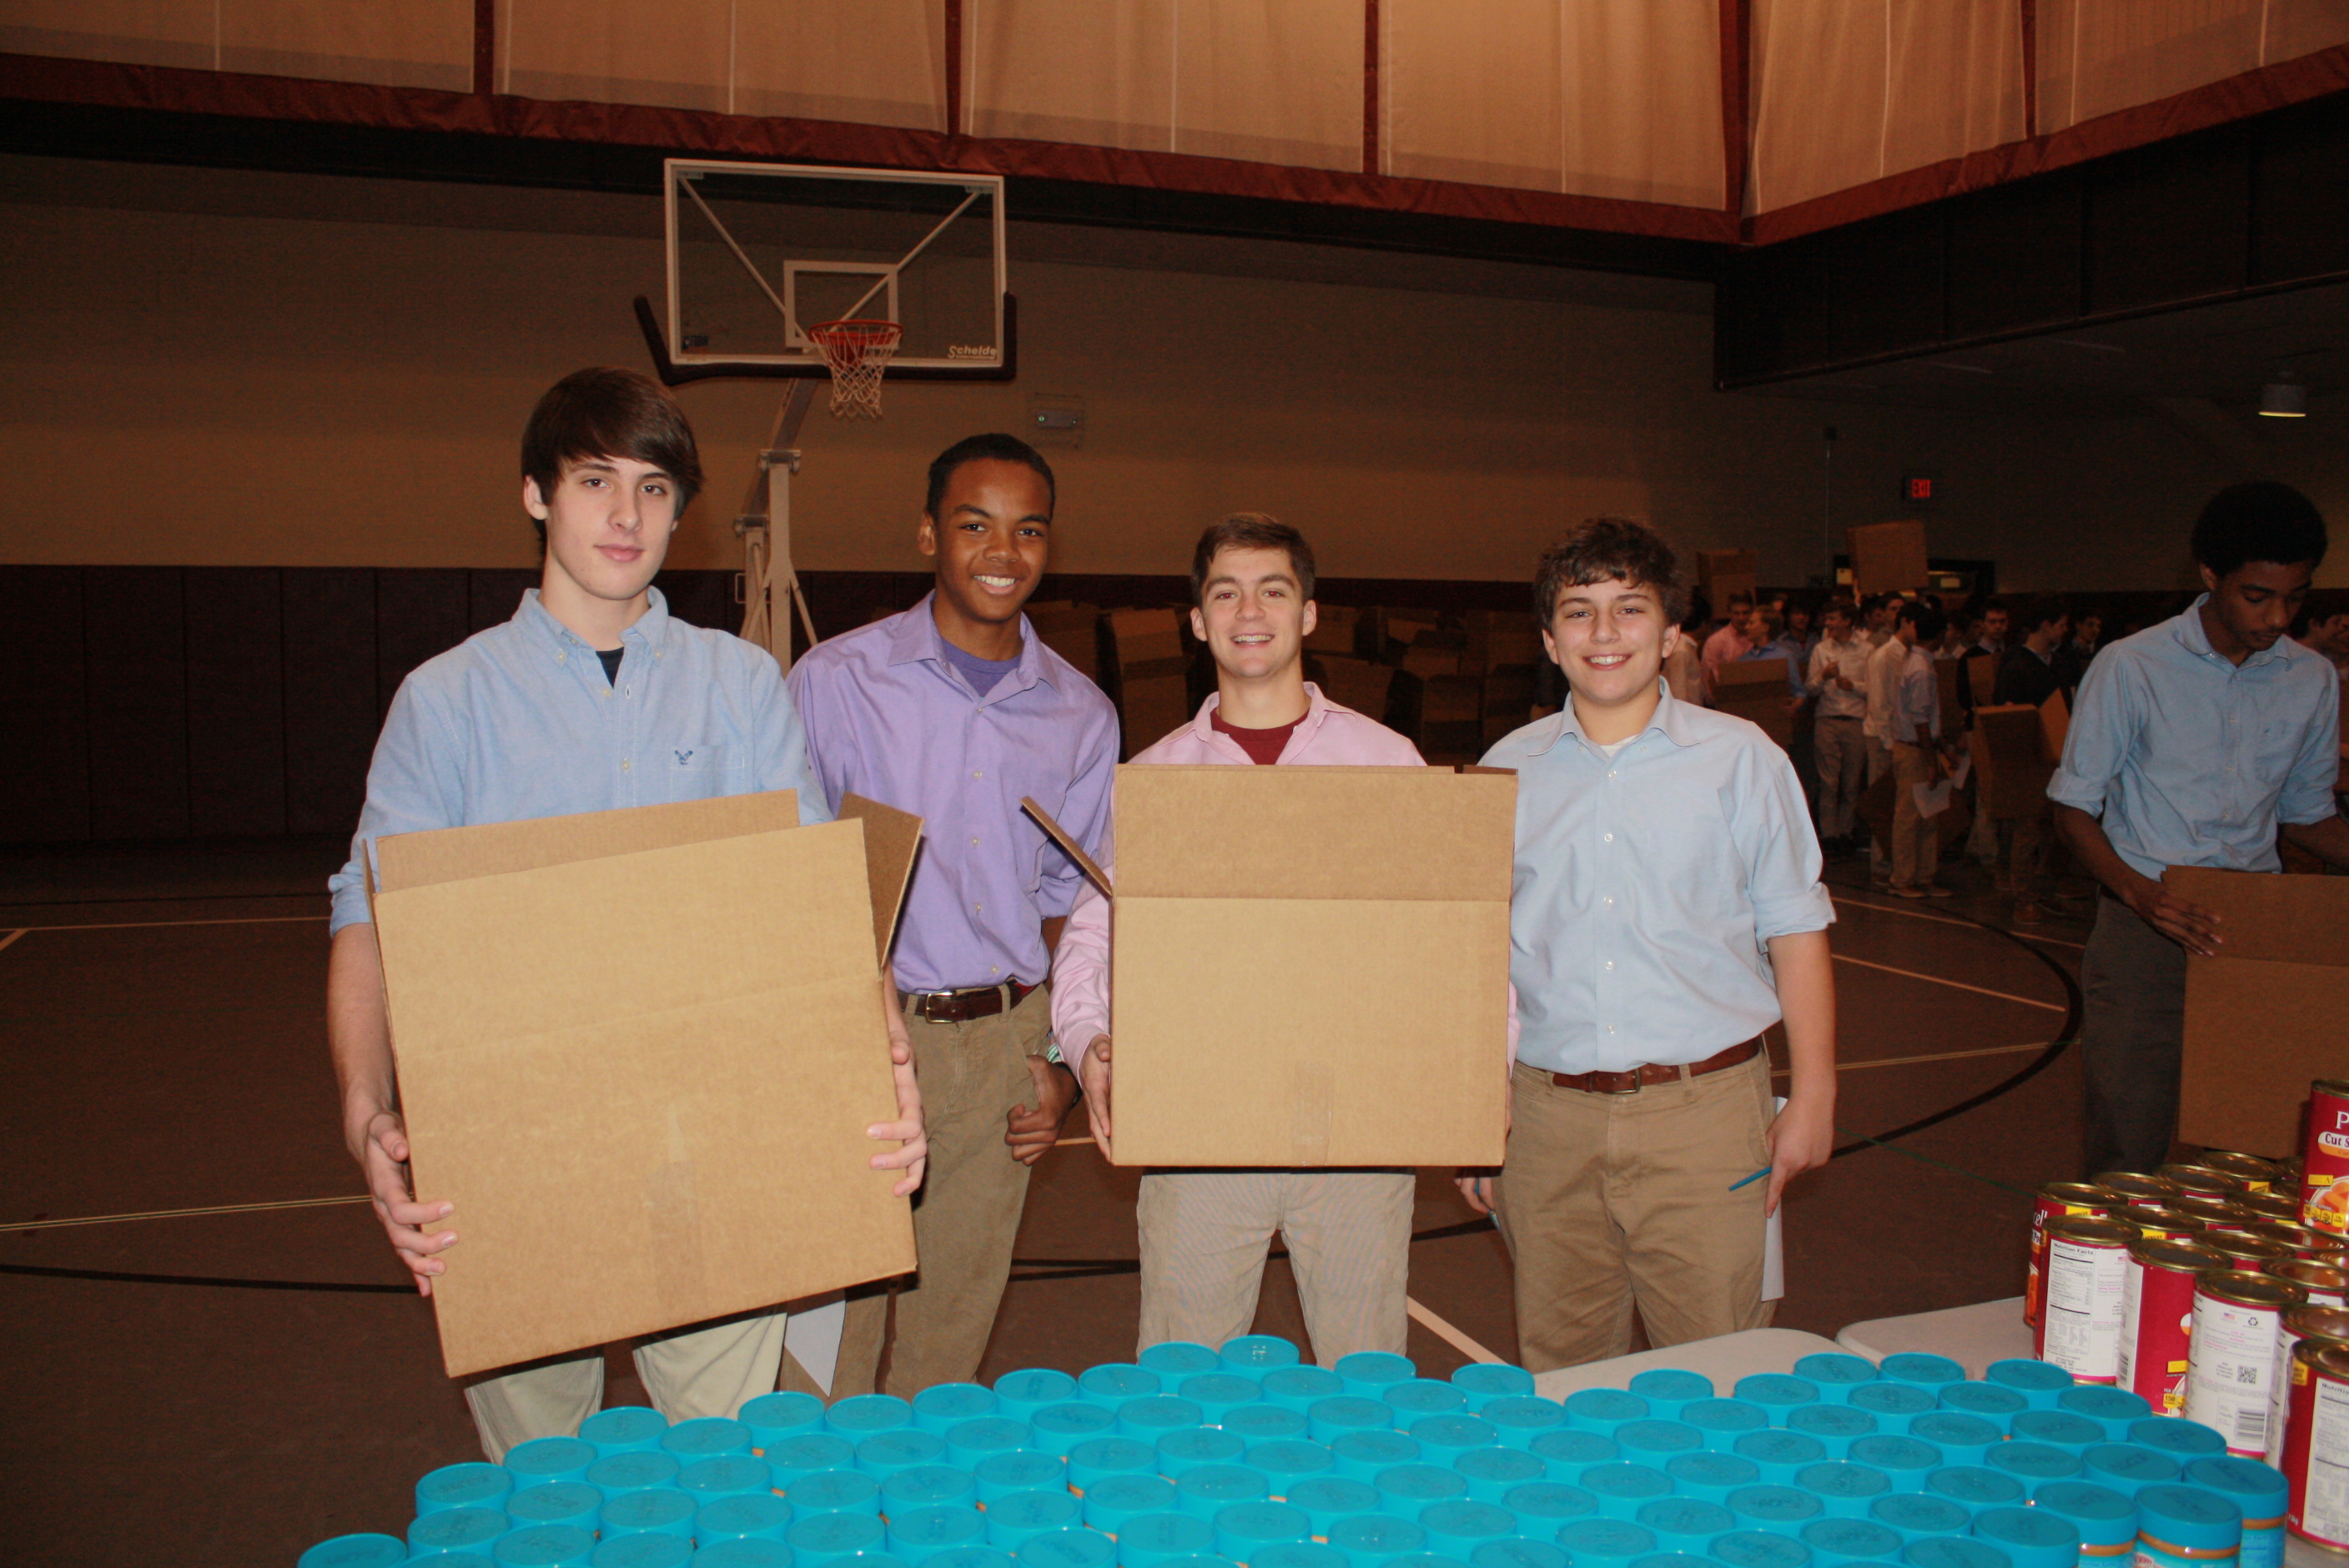 Upper School students at University School lend a helping hand for the Thanksgiving food drive.